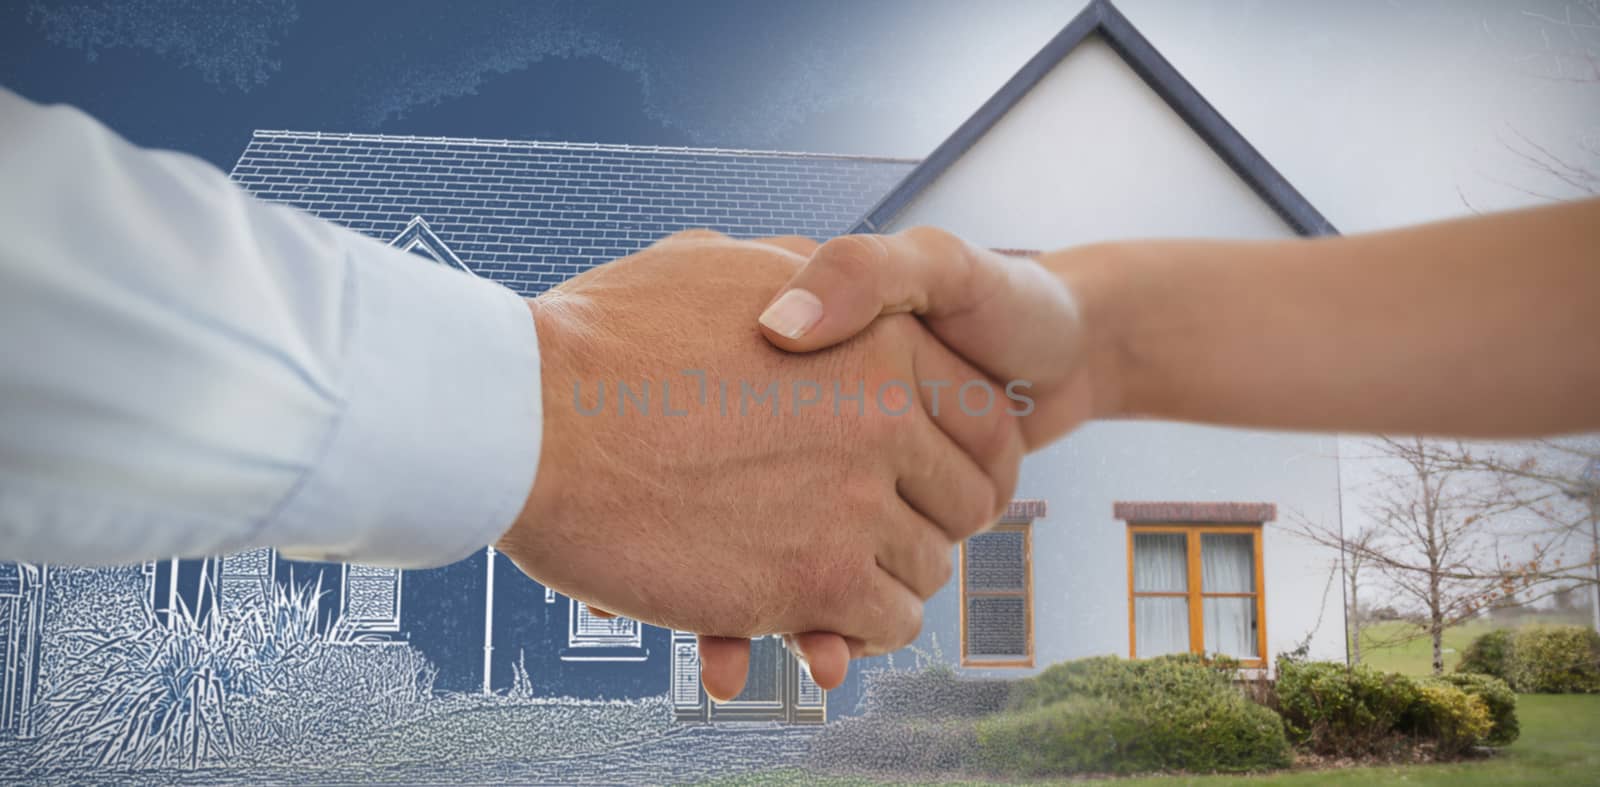 Cropped image of business people holding hands against pretty house with a blue and white filter